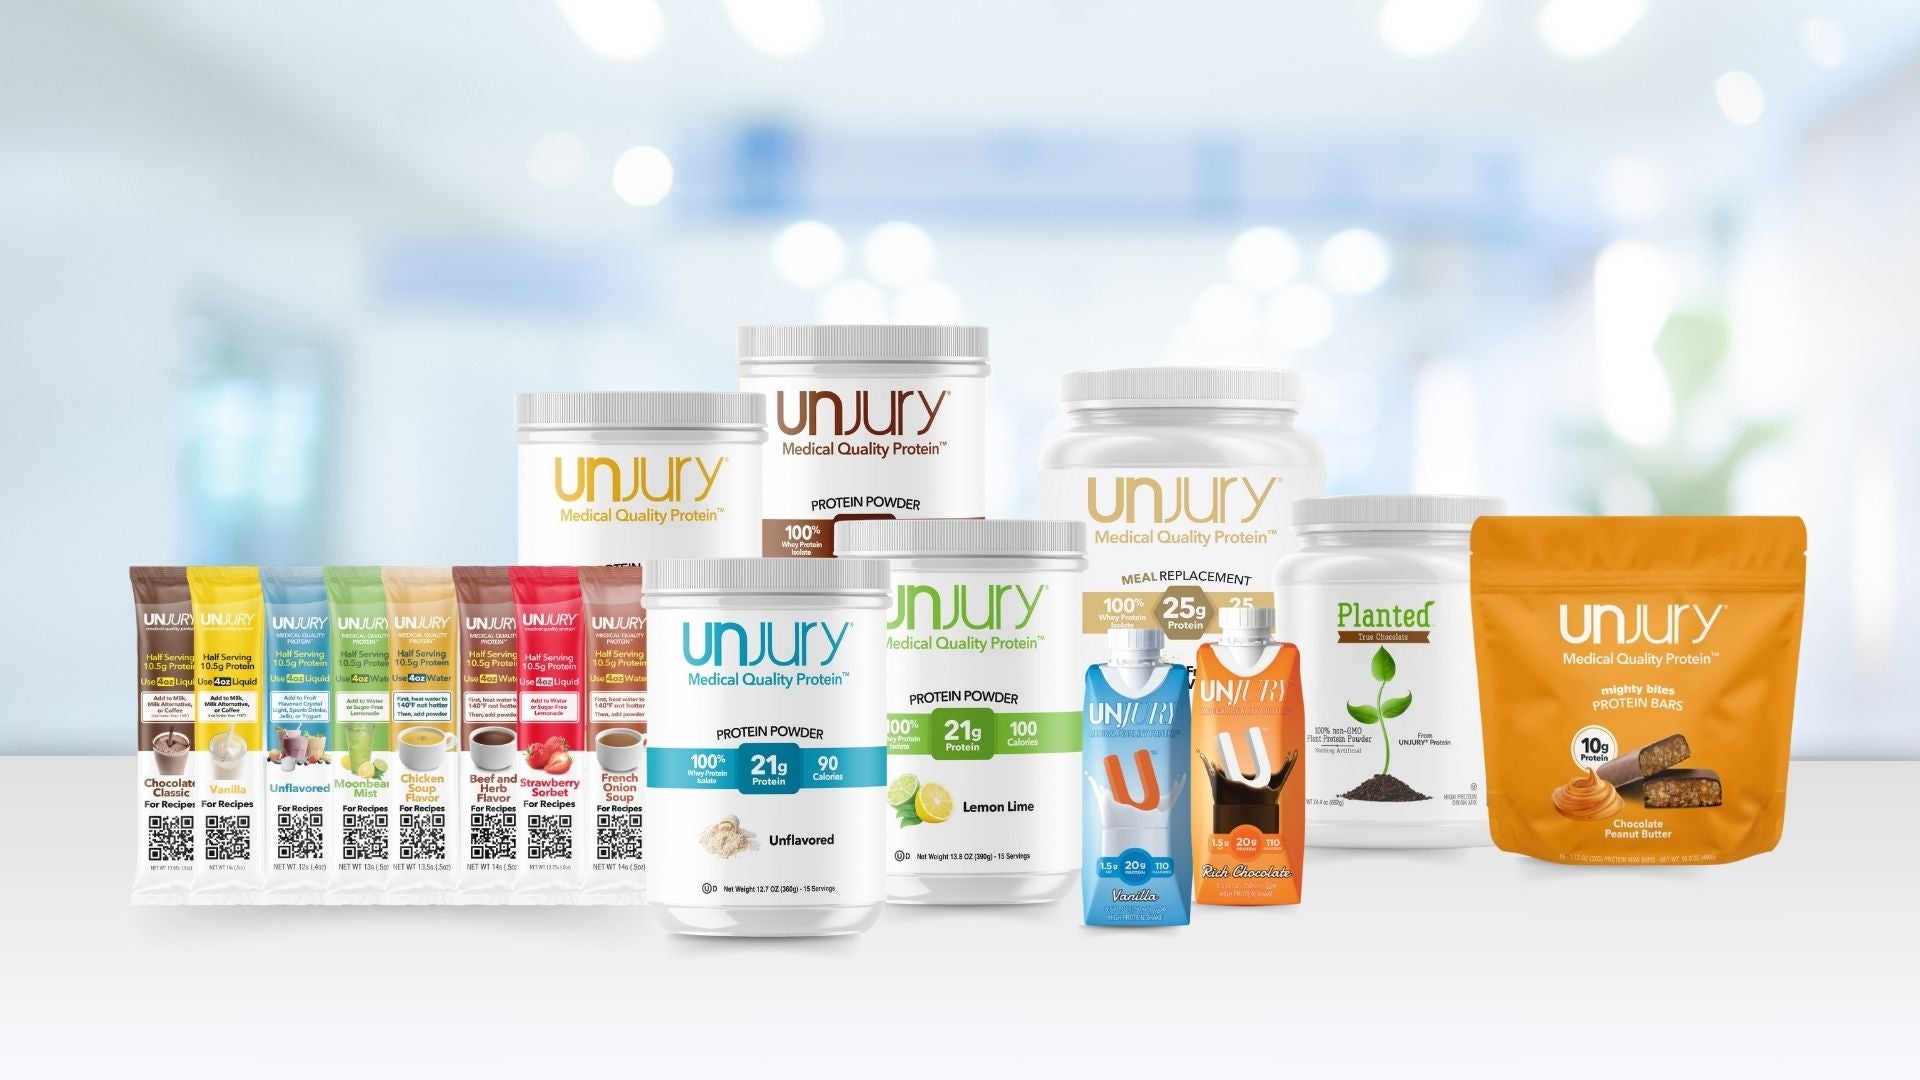 Unjury products including protein powder, protein bars, ready-to-drink shakes, and meal replacement powders. 